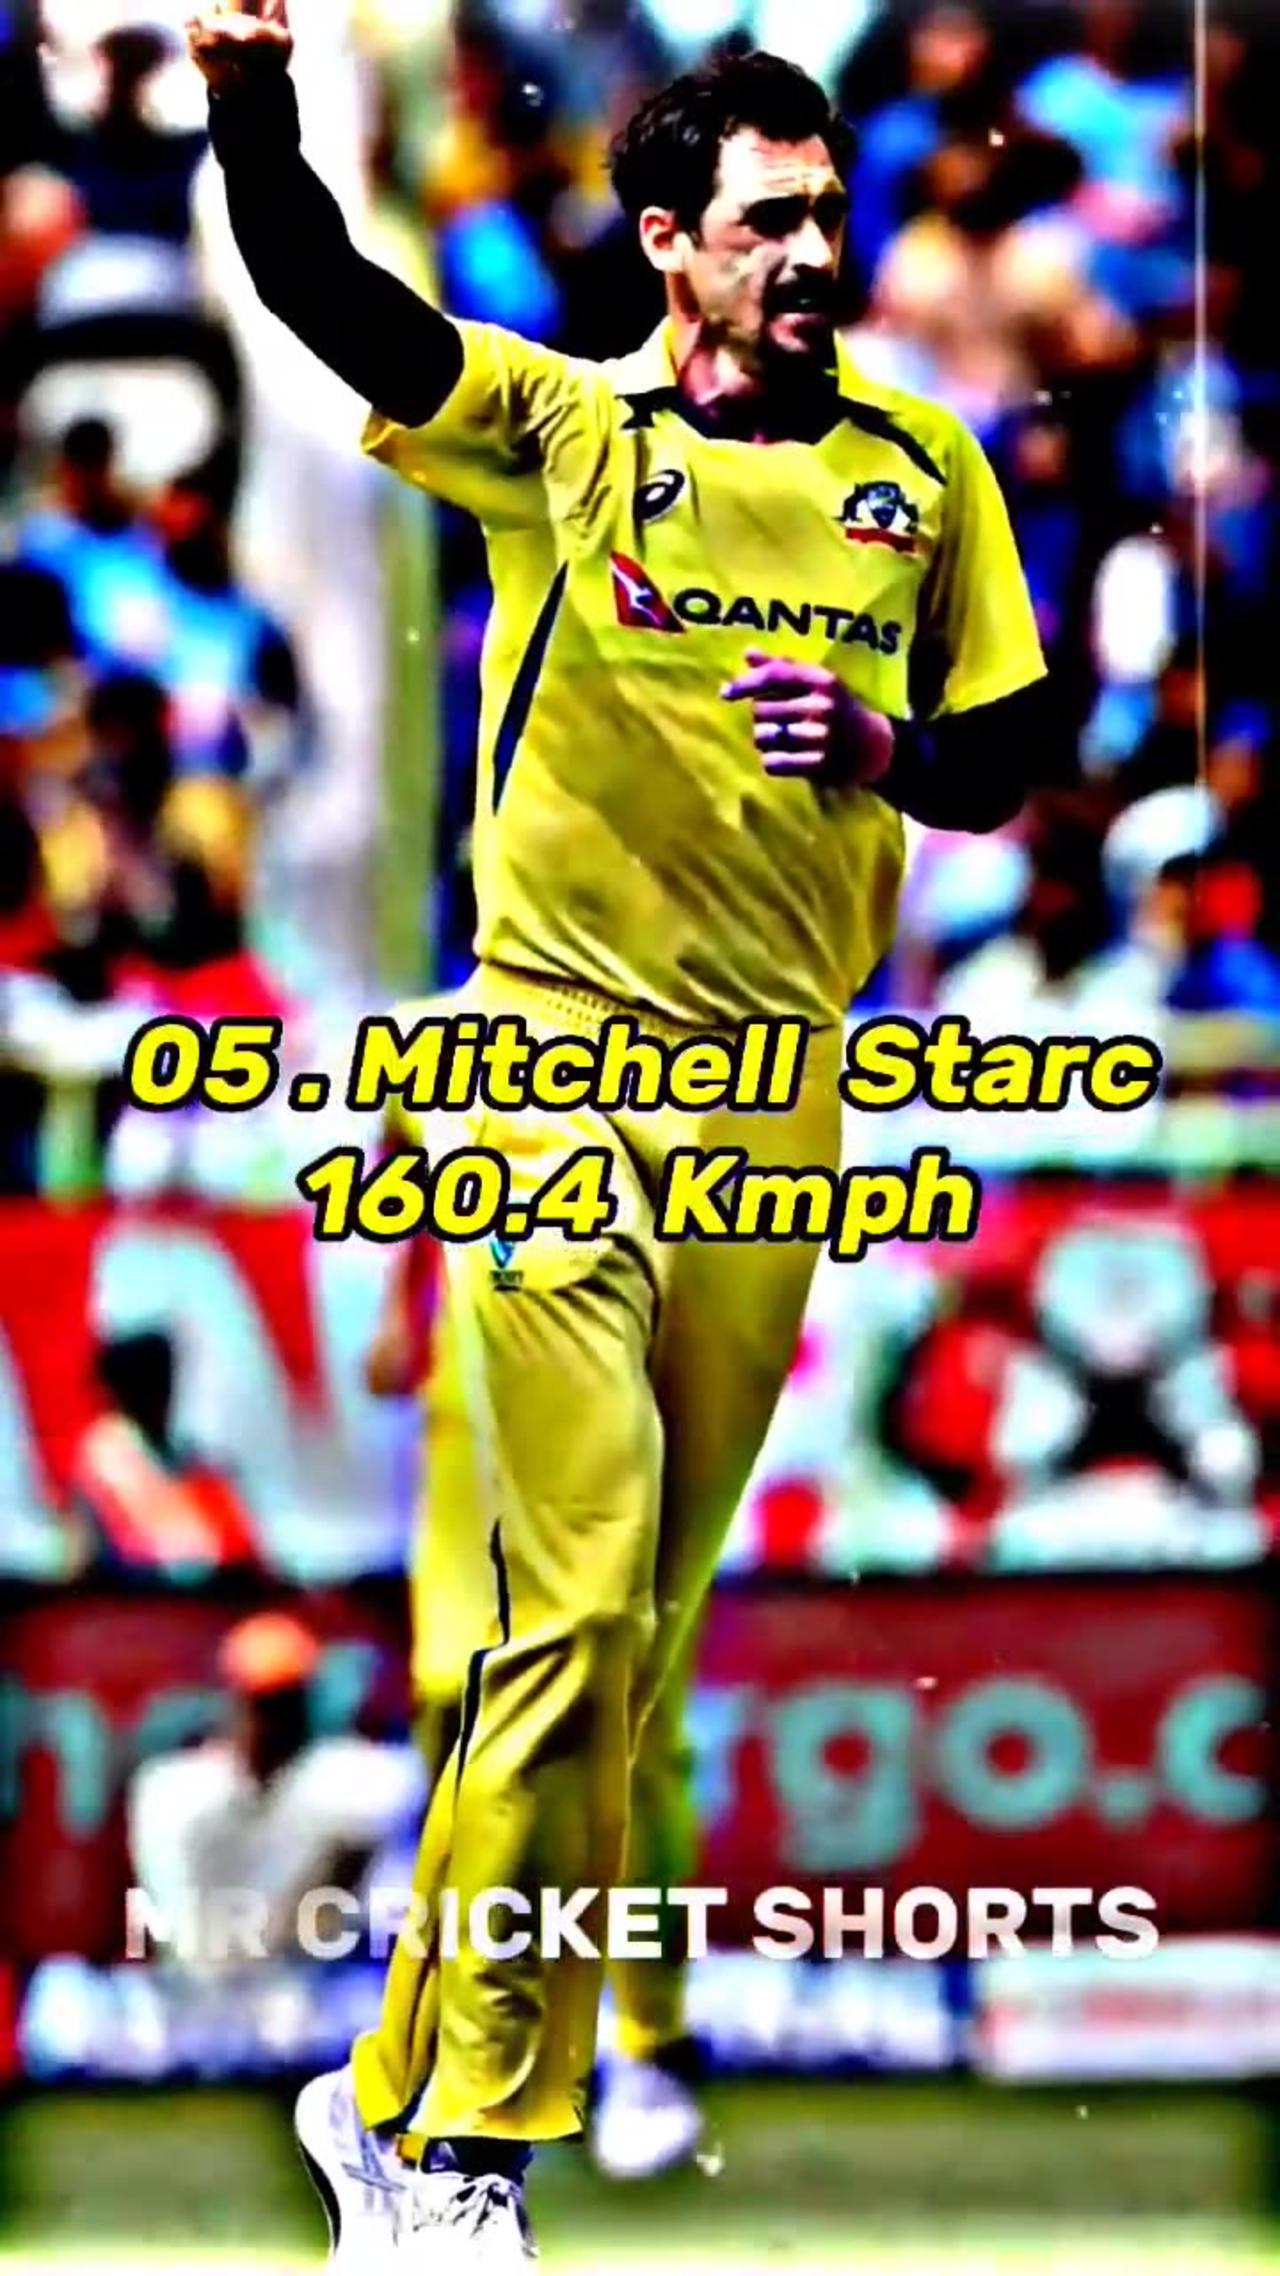 Fastest ball in cricket history